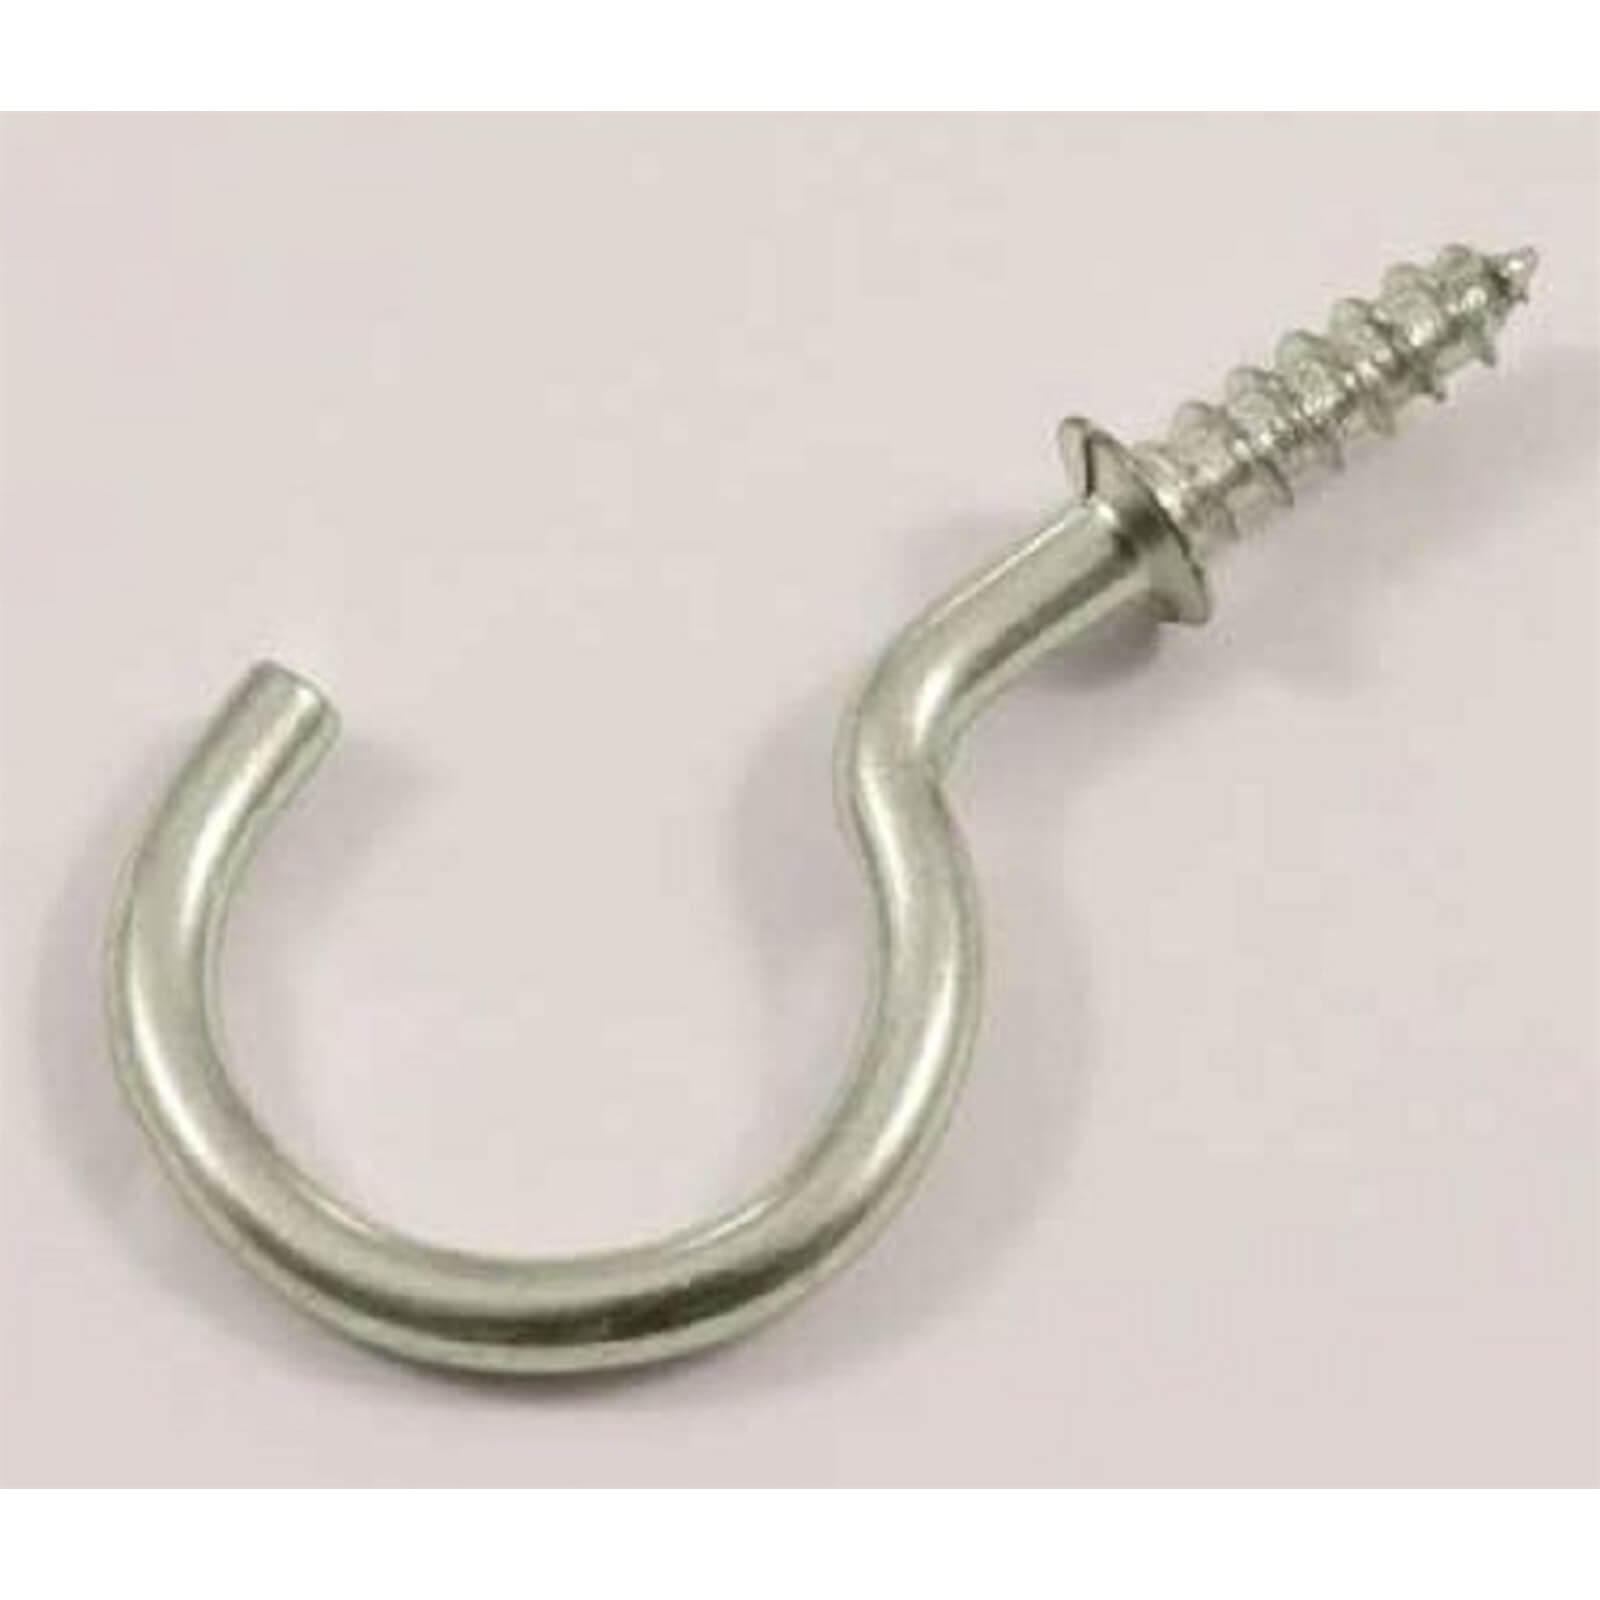 Photo of Round Cup Hook - Zinc Plated - 25mm - 4 Pack